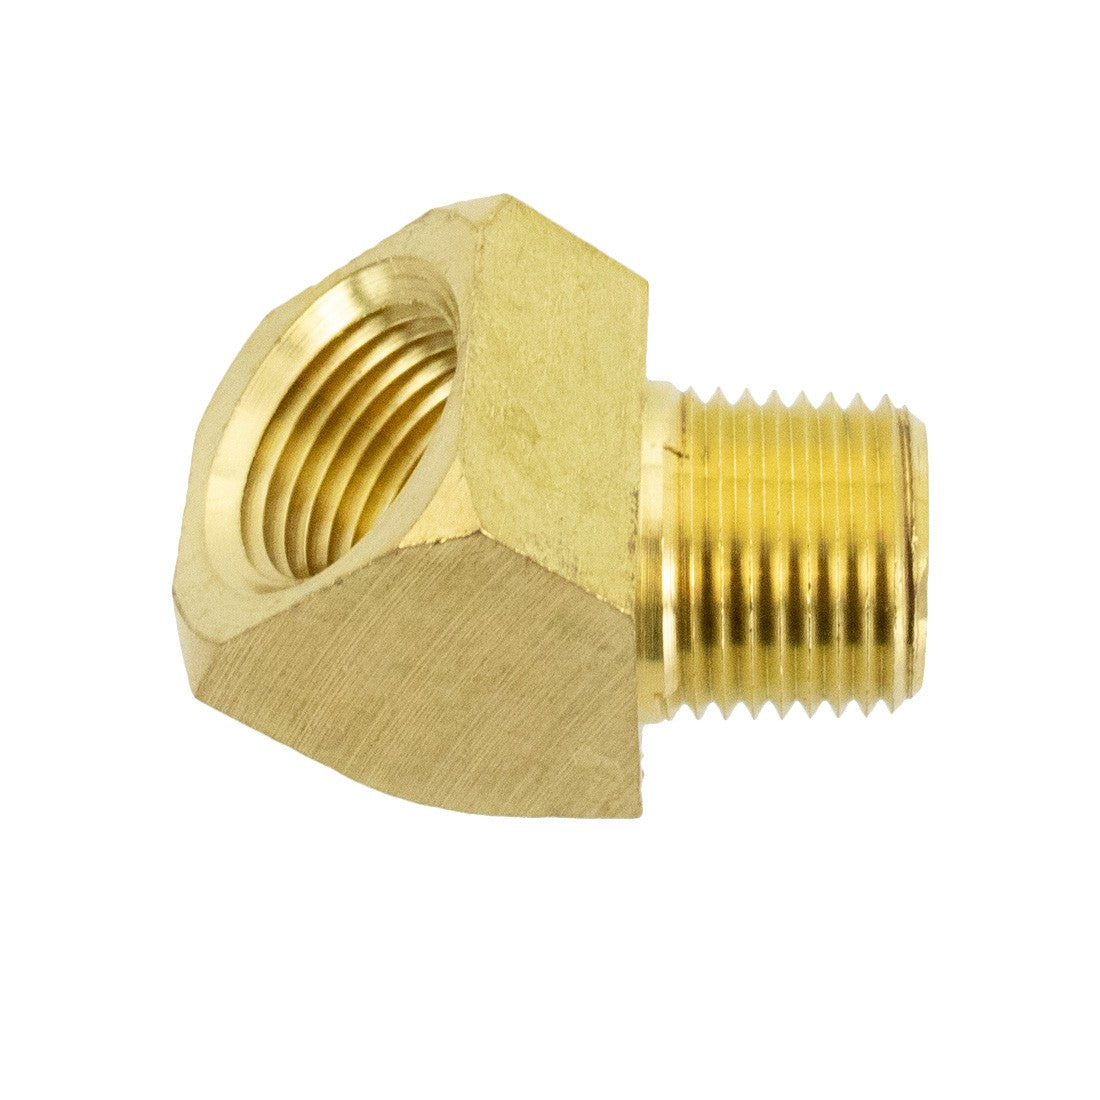 IPC Eagle Fitting - 1/2 Inch NPT x 45° Street Elbow Brass - Oblique Side View